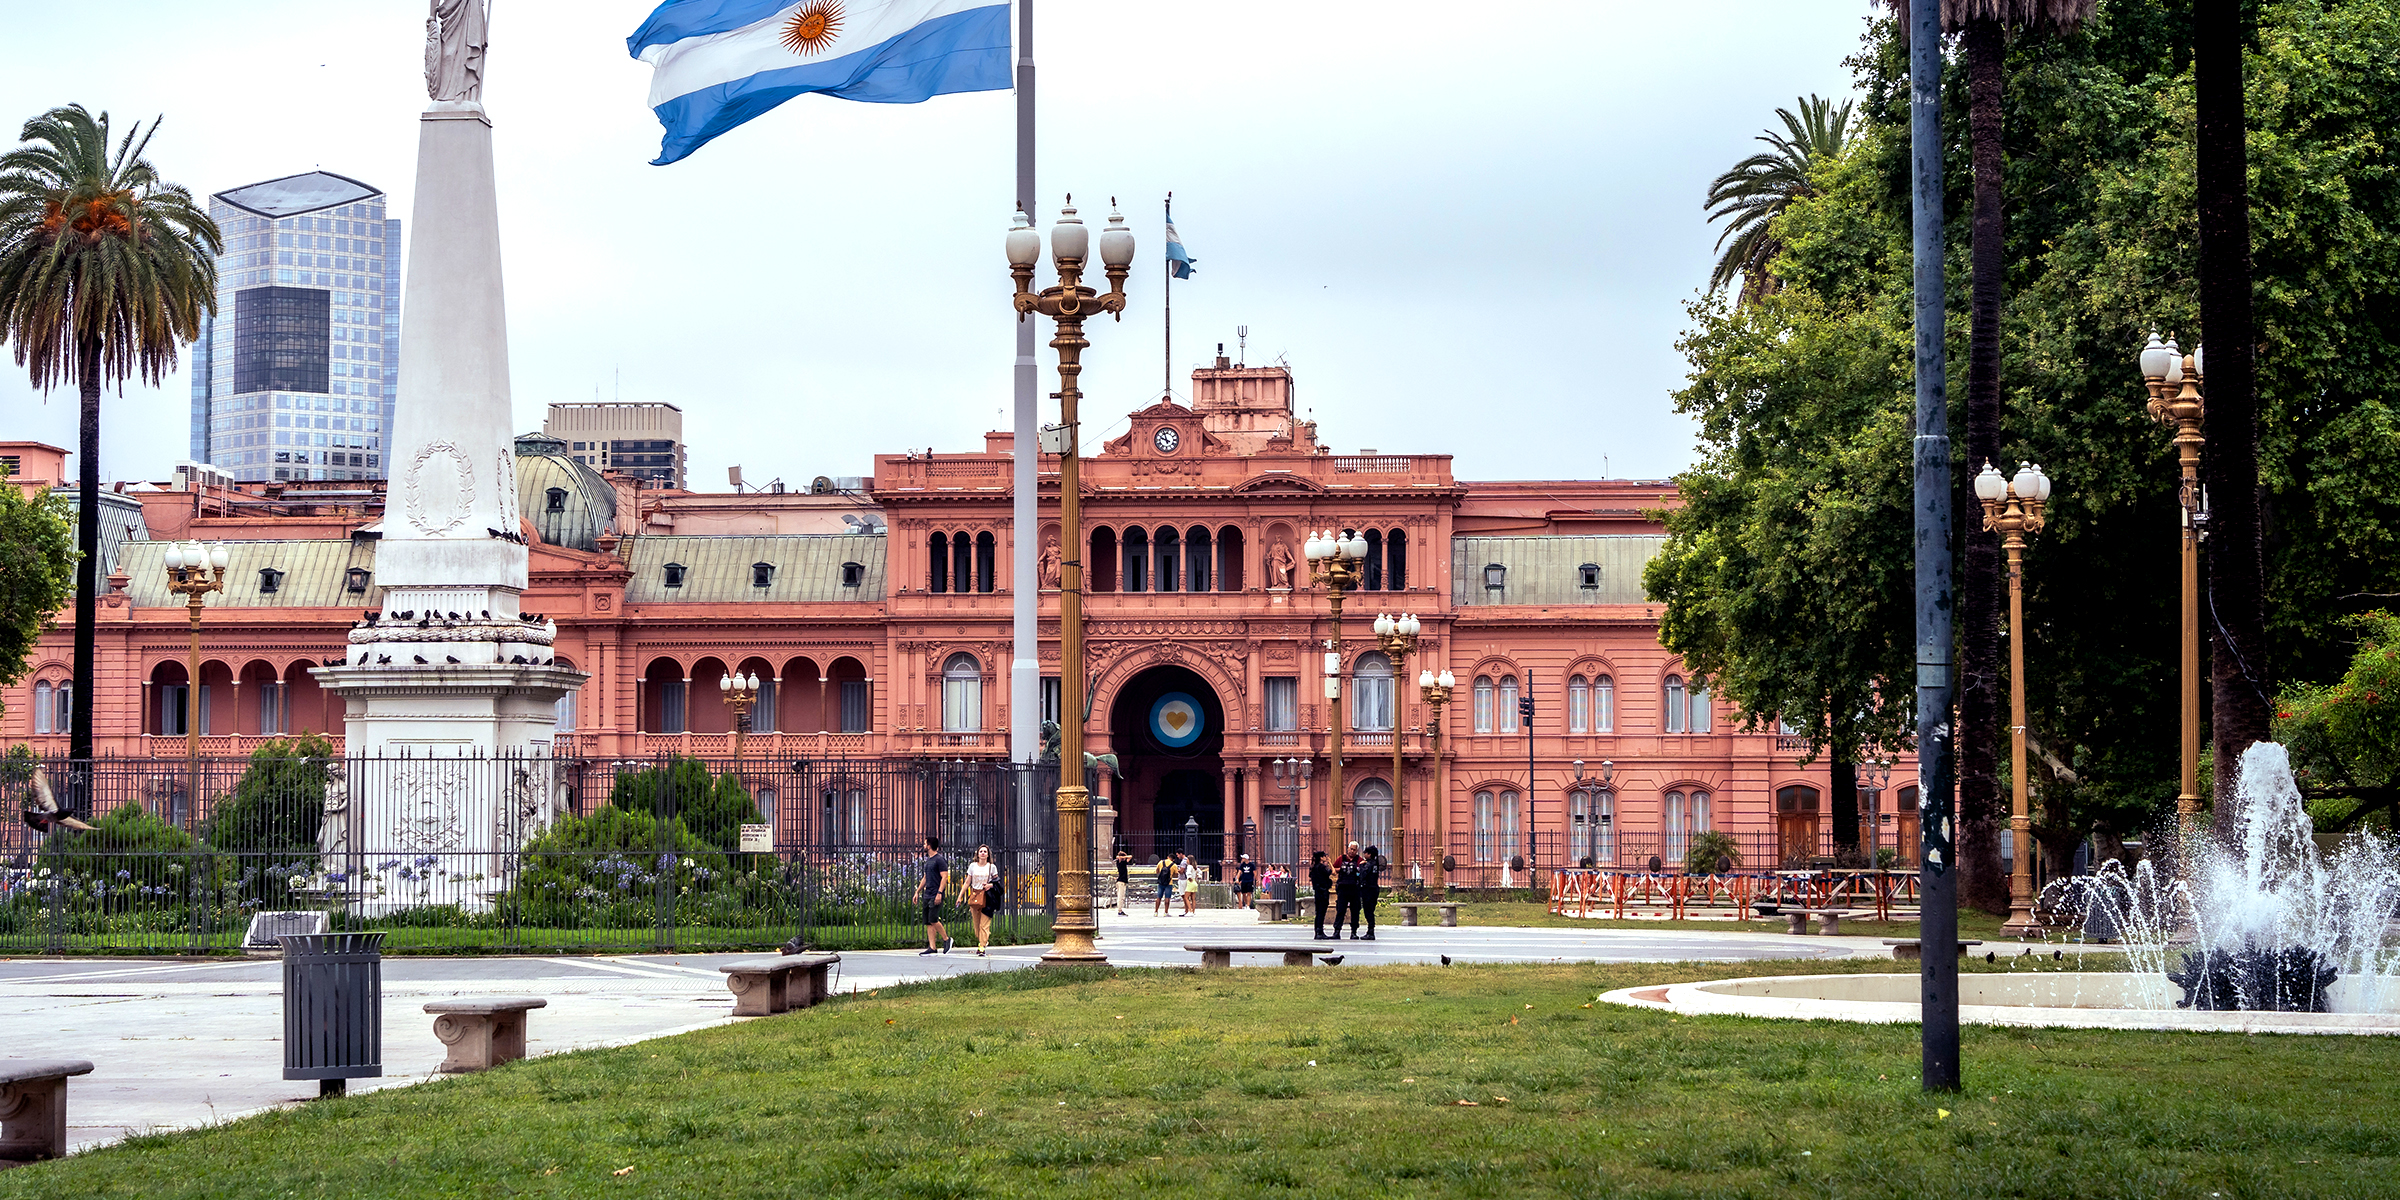 The Argentine flag in at Plaza de Mayo in Buenos Aires, Argentina | Source: Getty Images